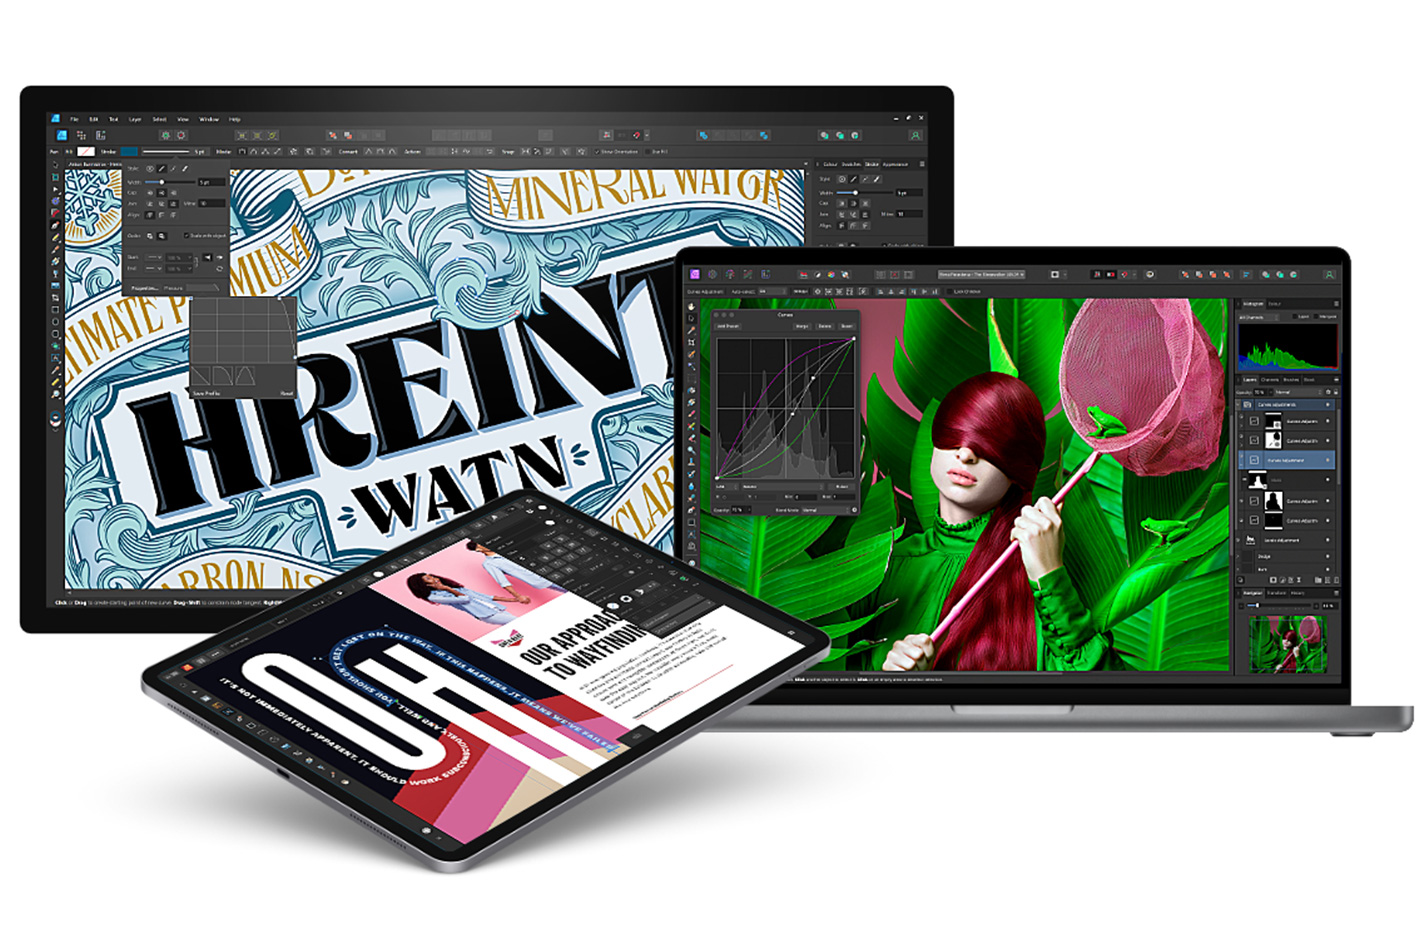 Affinity Suite Version 2: a new standard in creative software